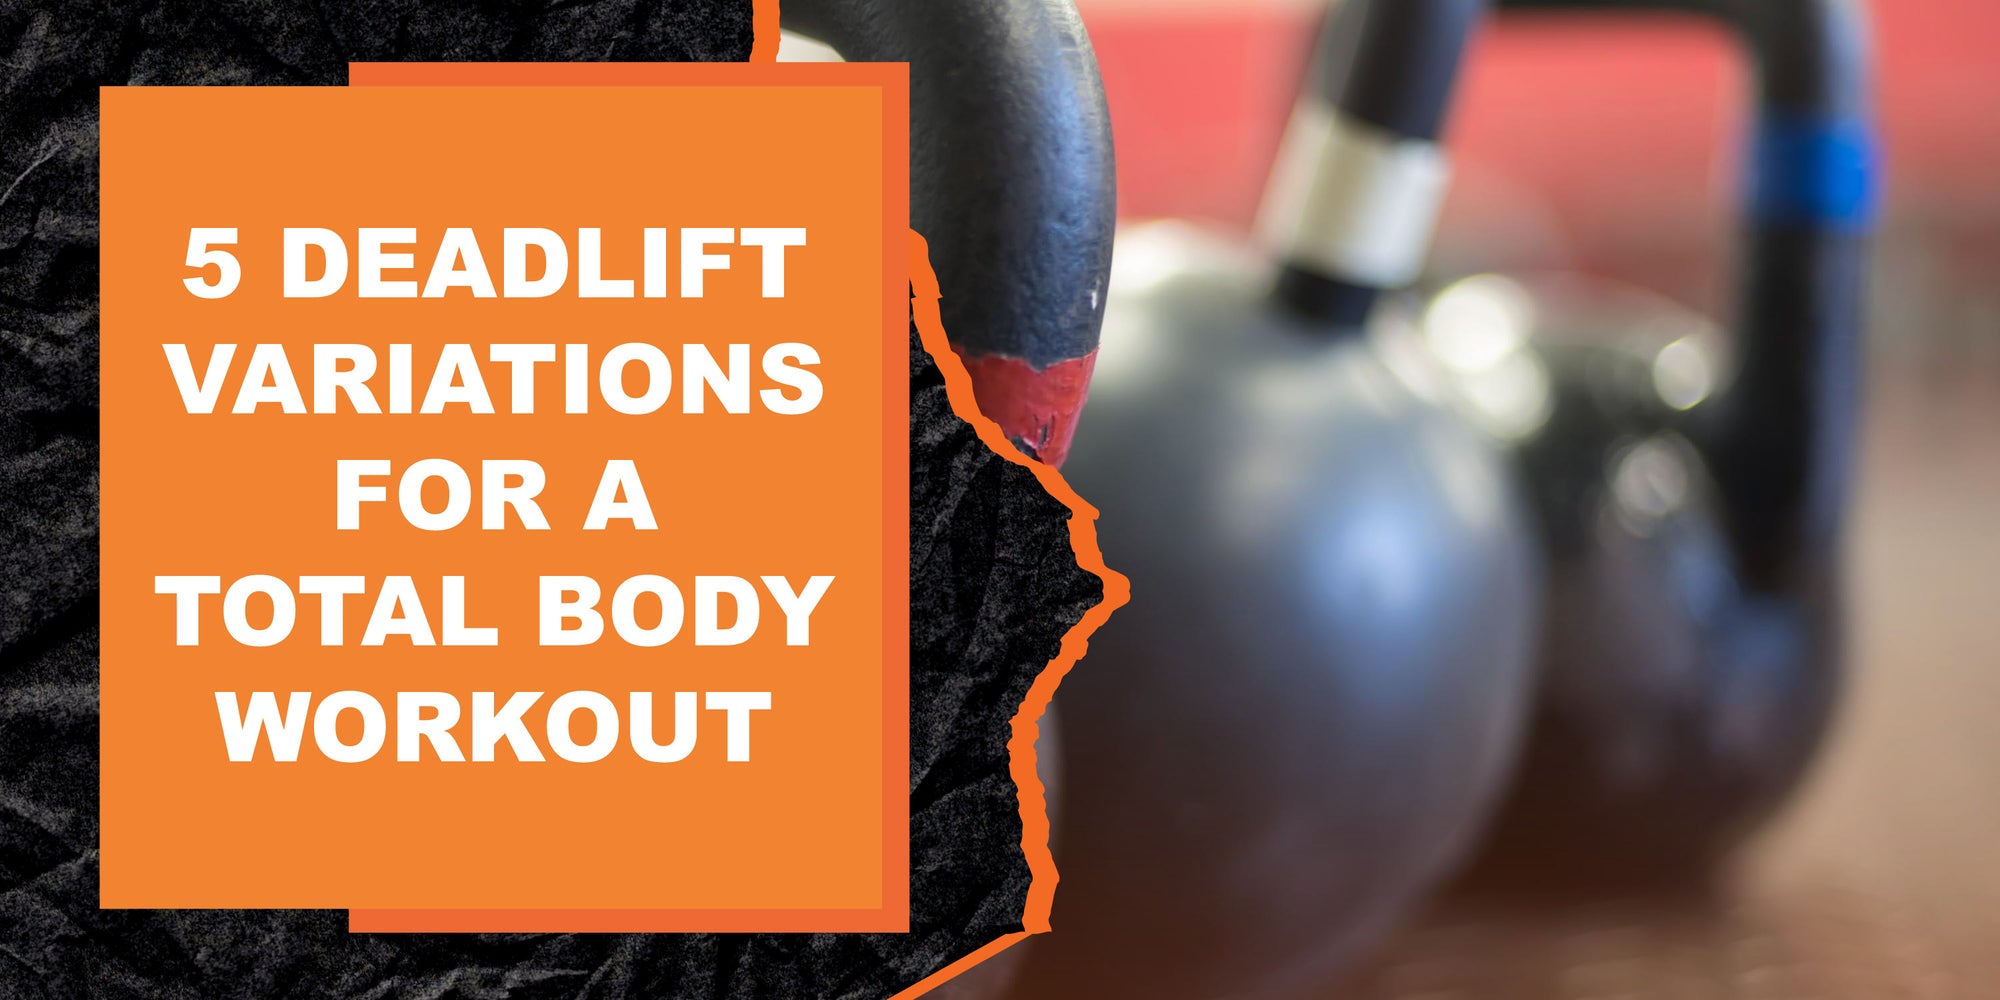 5 Deadlift Variations for a Total Body Workout